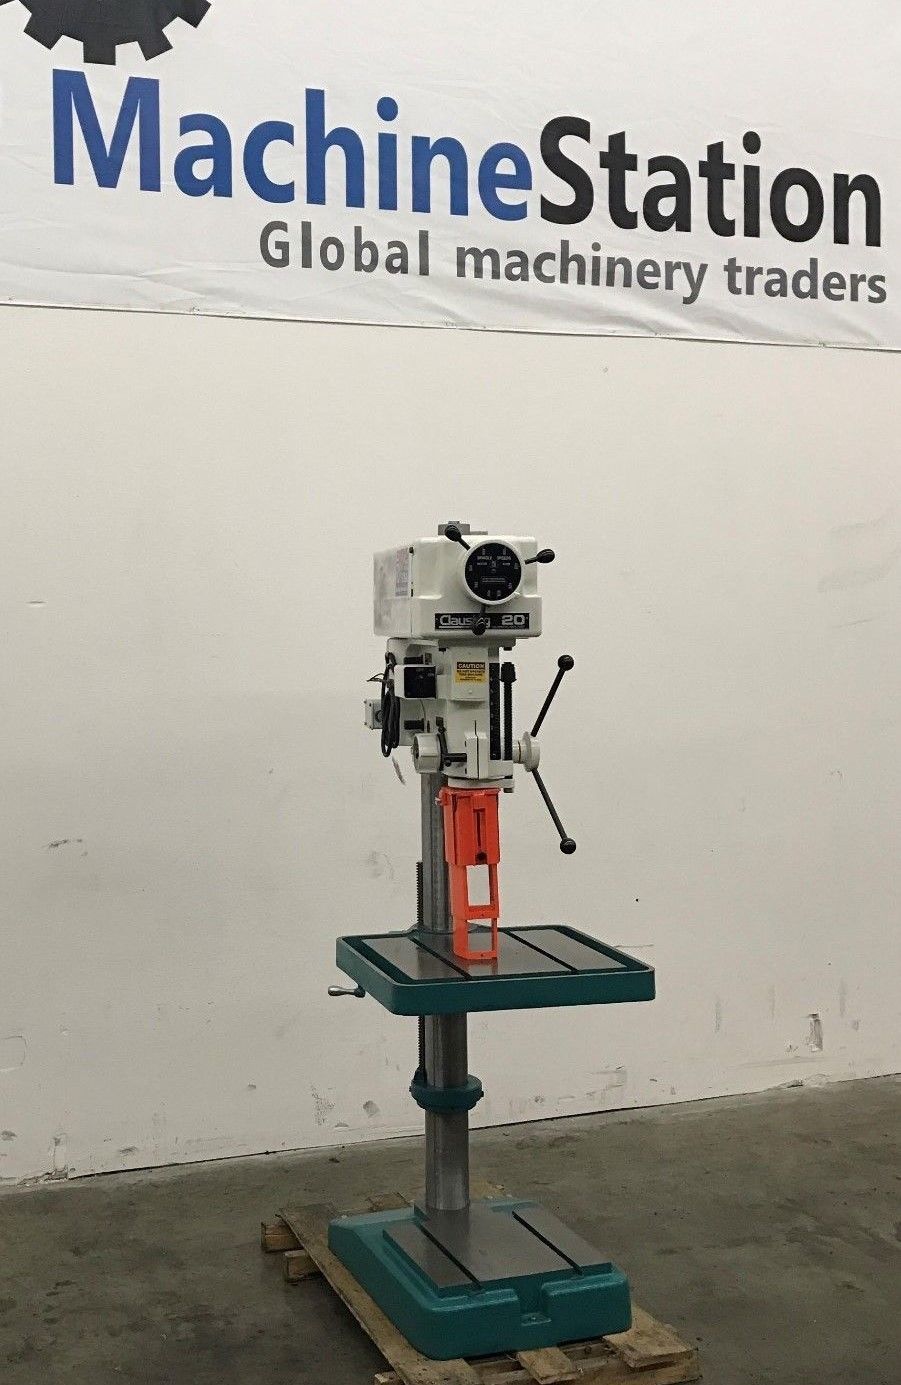 Download NEW Clausing # 2274 20" Variable Speed Floor Drill Press - MachineStation